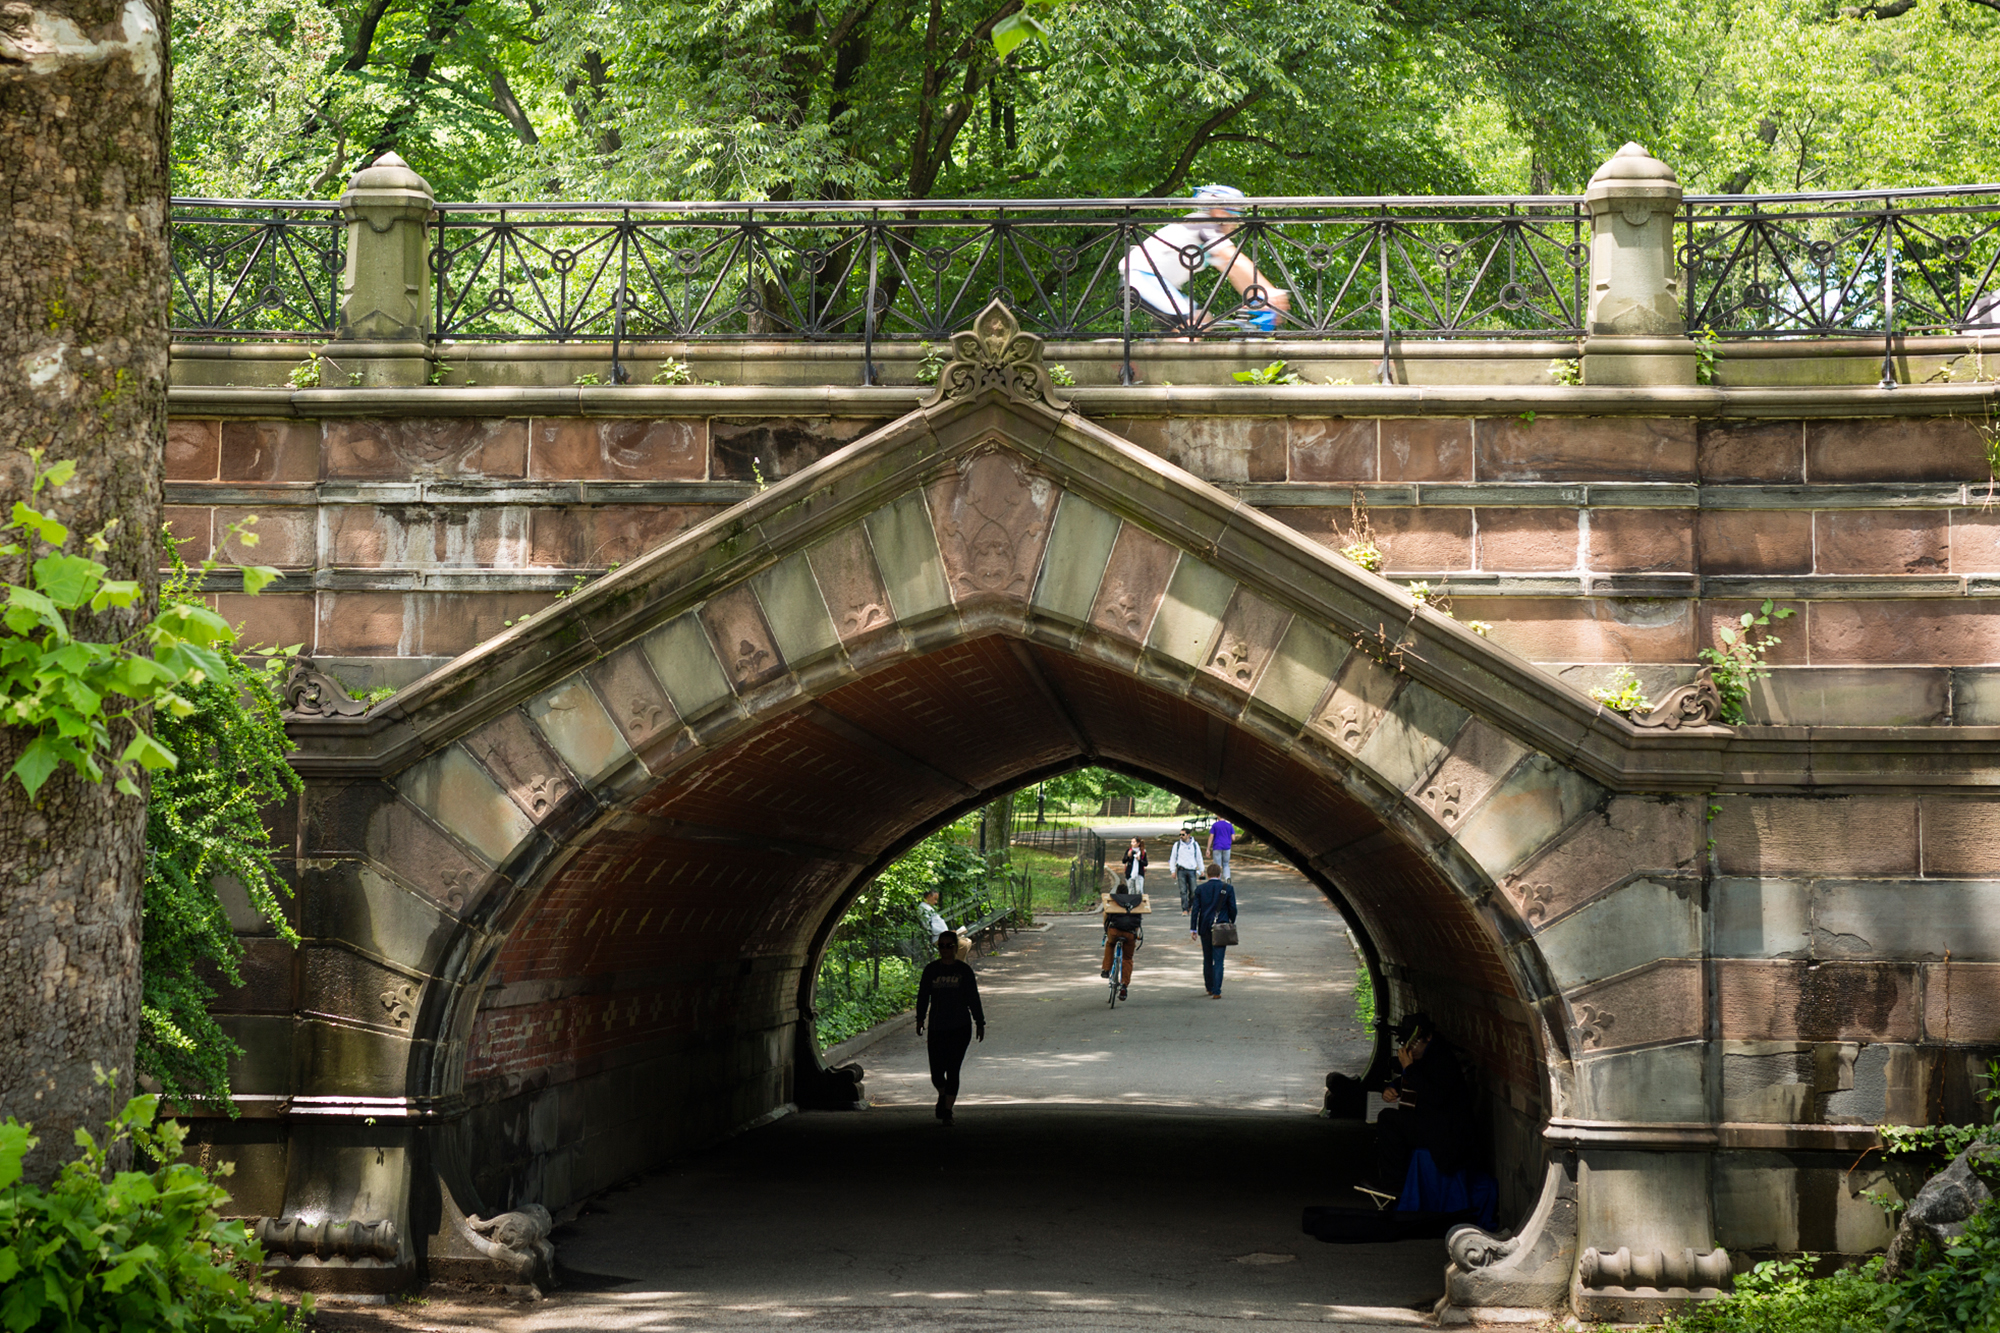 Central Park's original design used arches to keep pedestrians and carriage traffic separate, an idea he's hoping to revive.